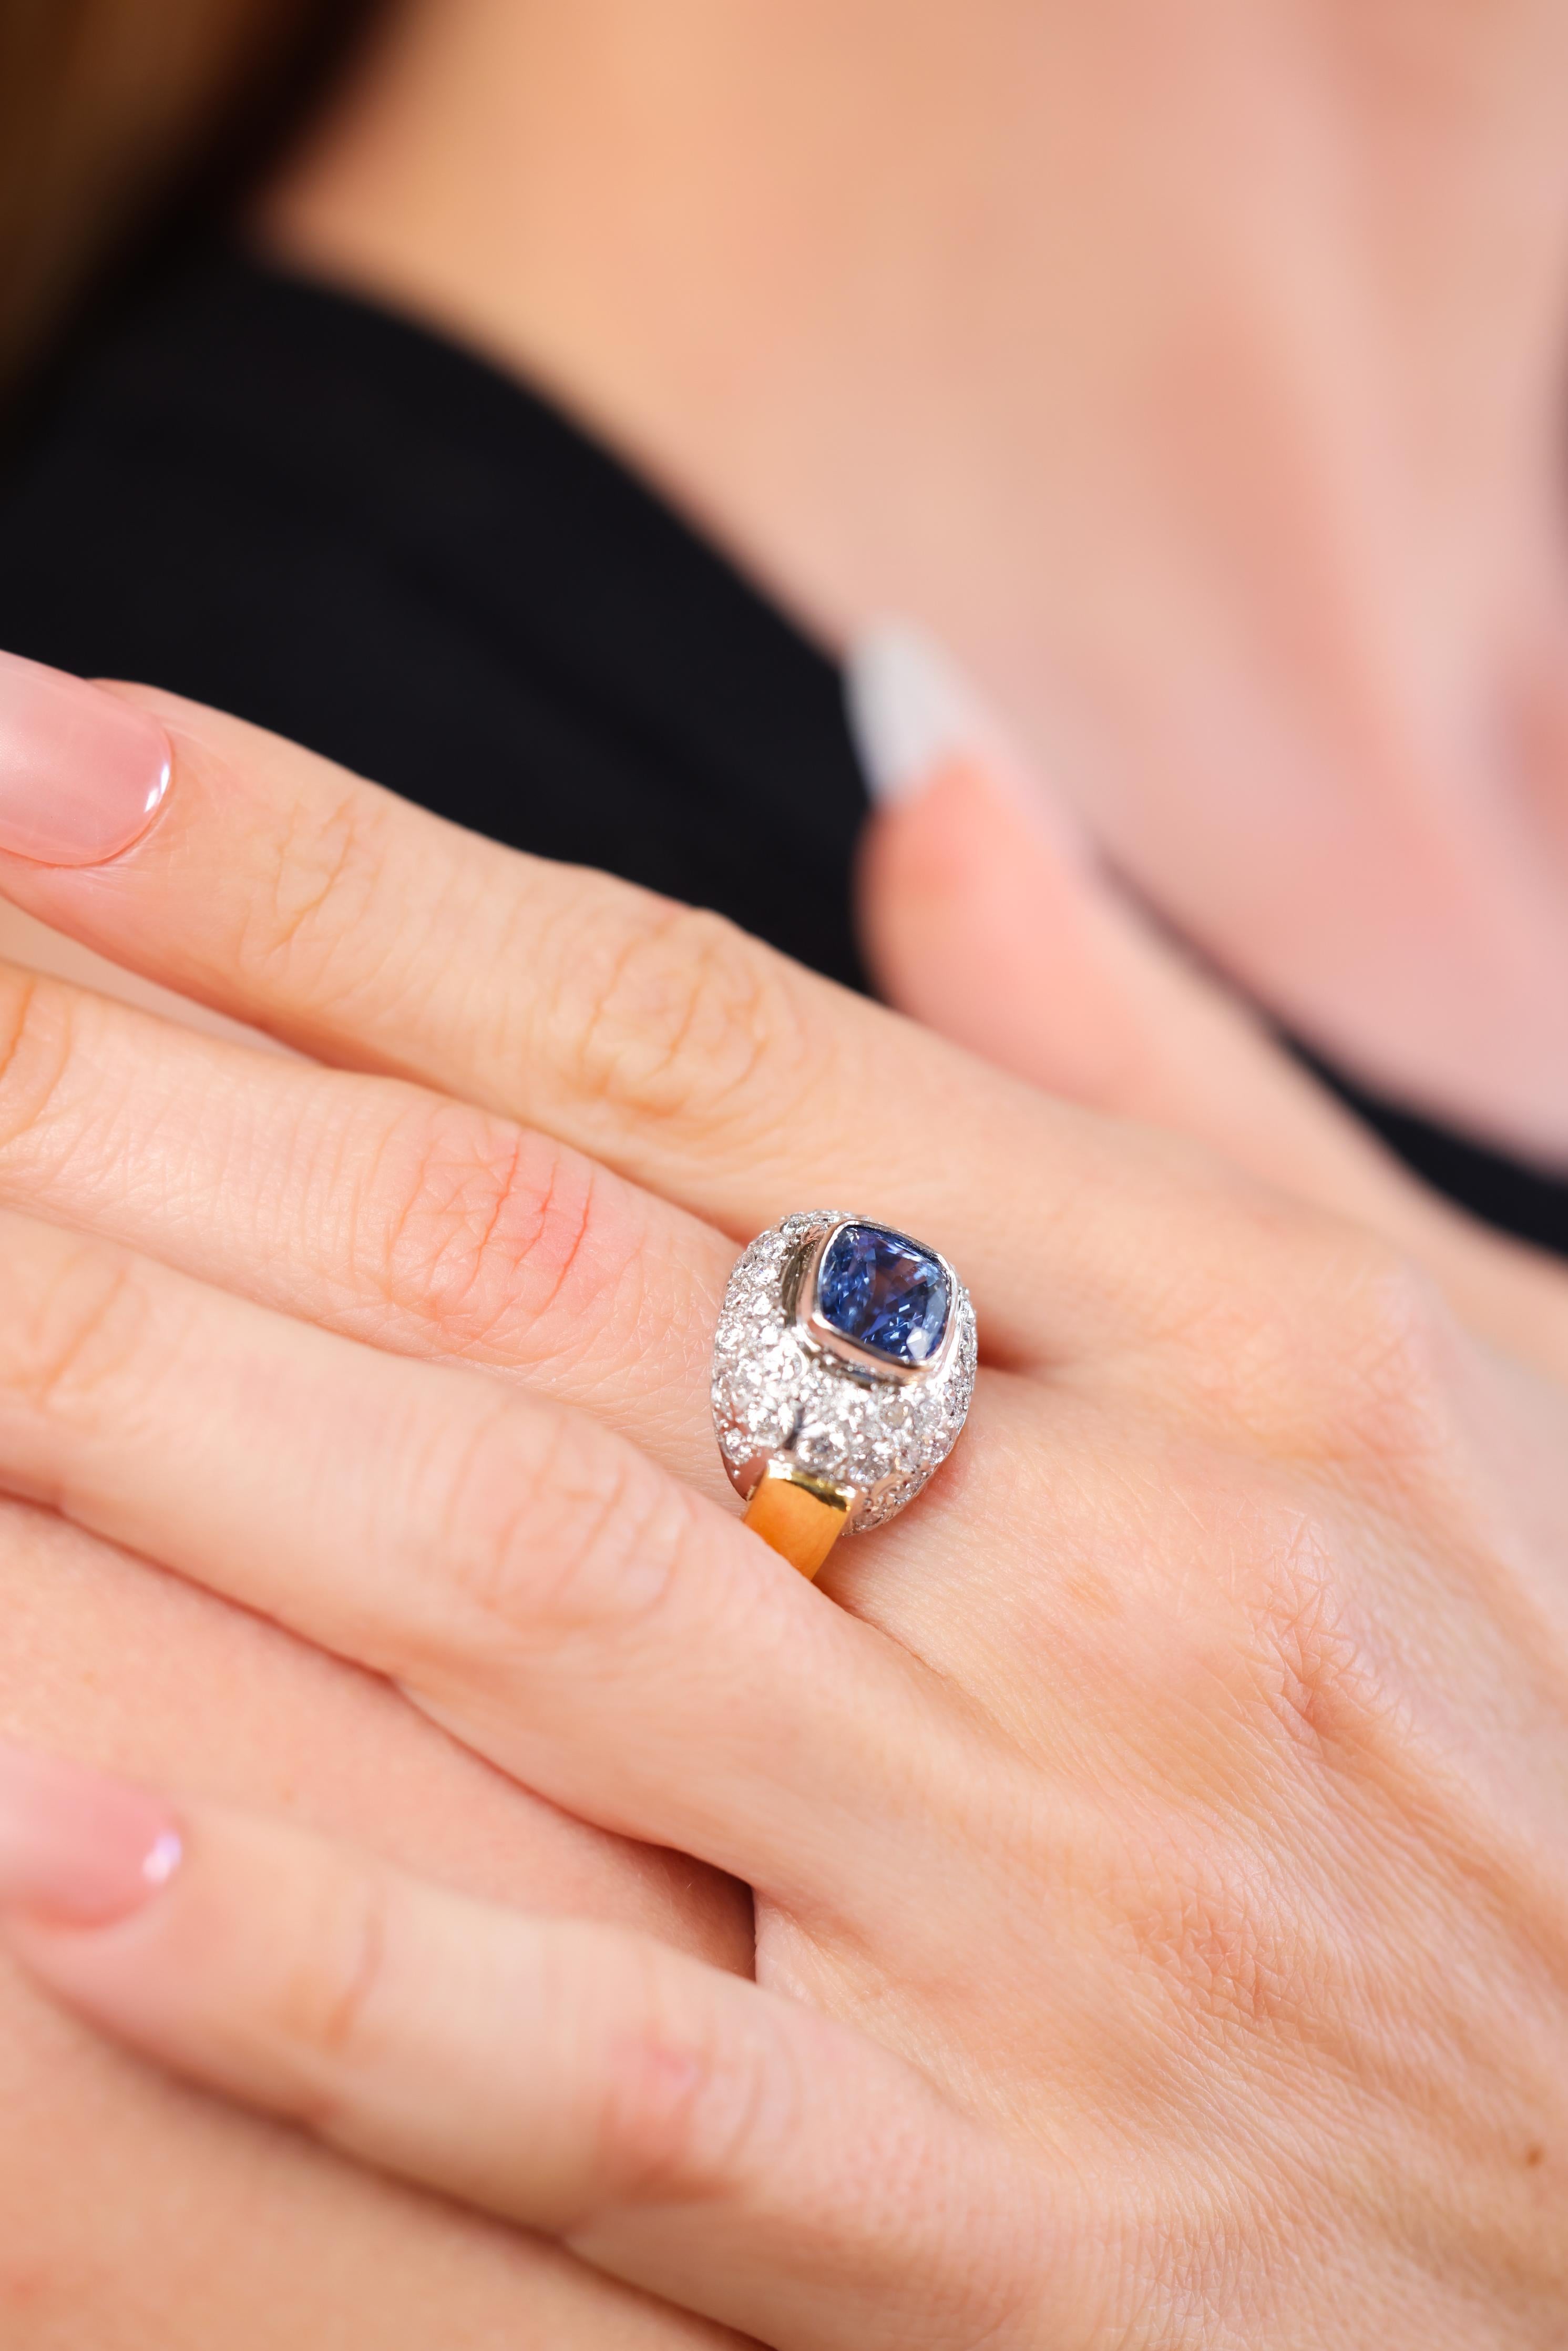 cushion cut cornflower blue sapphire weighing approximately 4 carat
Acccented by 42 round brilliant cut diamonds weighing approximately 0.80 carats 
G-H color 
VS clarity 
18k white and yellow gold 
Circa 1980s 
Rings size 7 and can be resized 
9.9